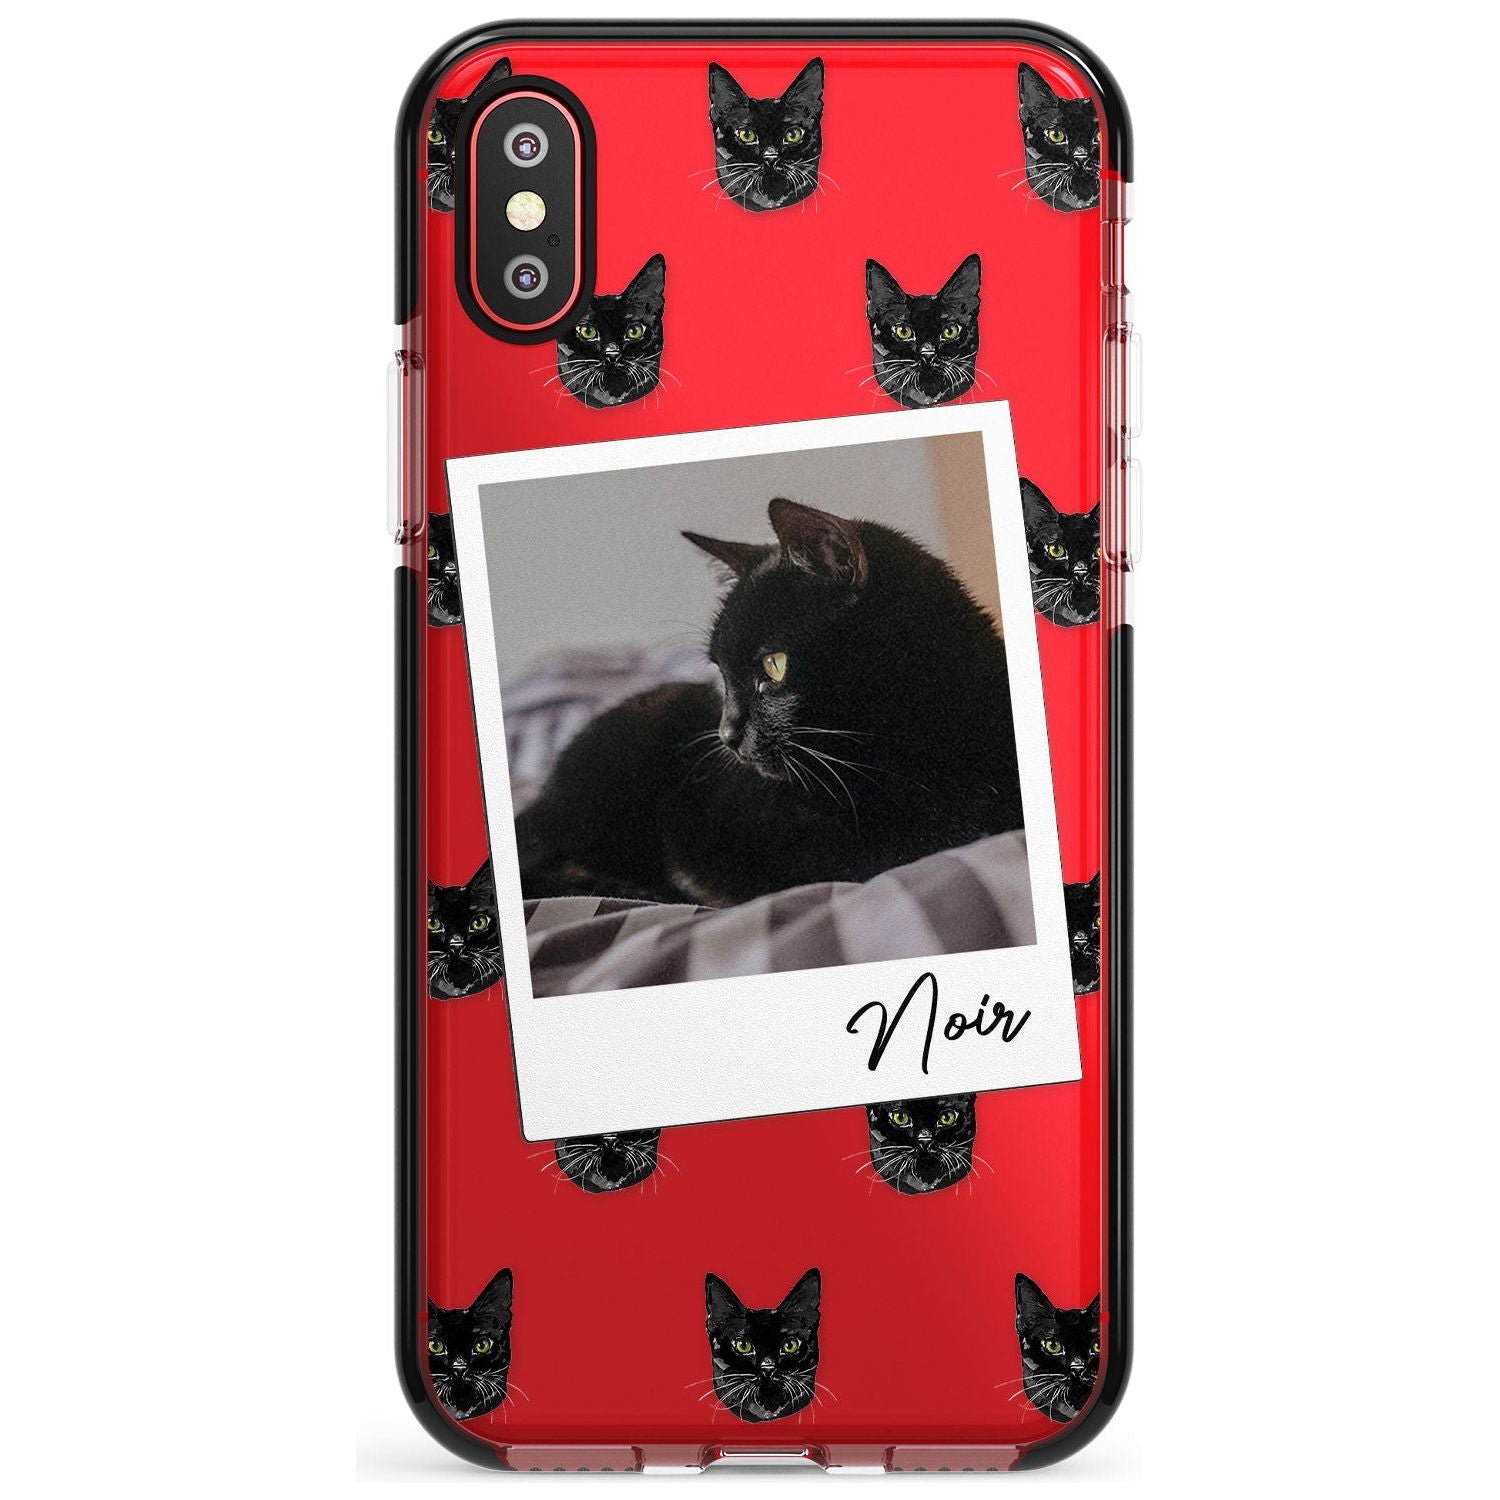 Personalised Bombay Cat Photo Black Impact Phone Case for iPhone X XS Max XR